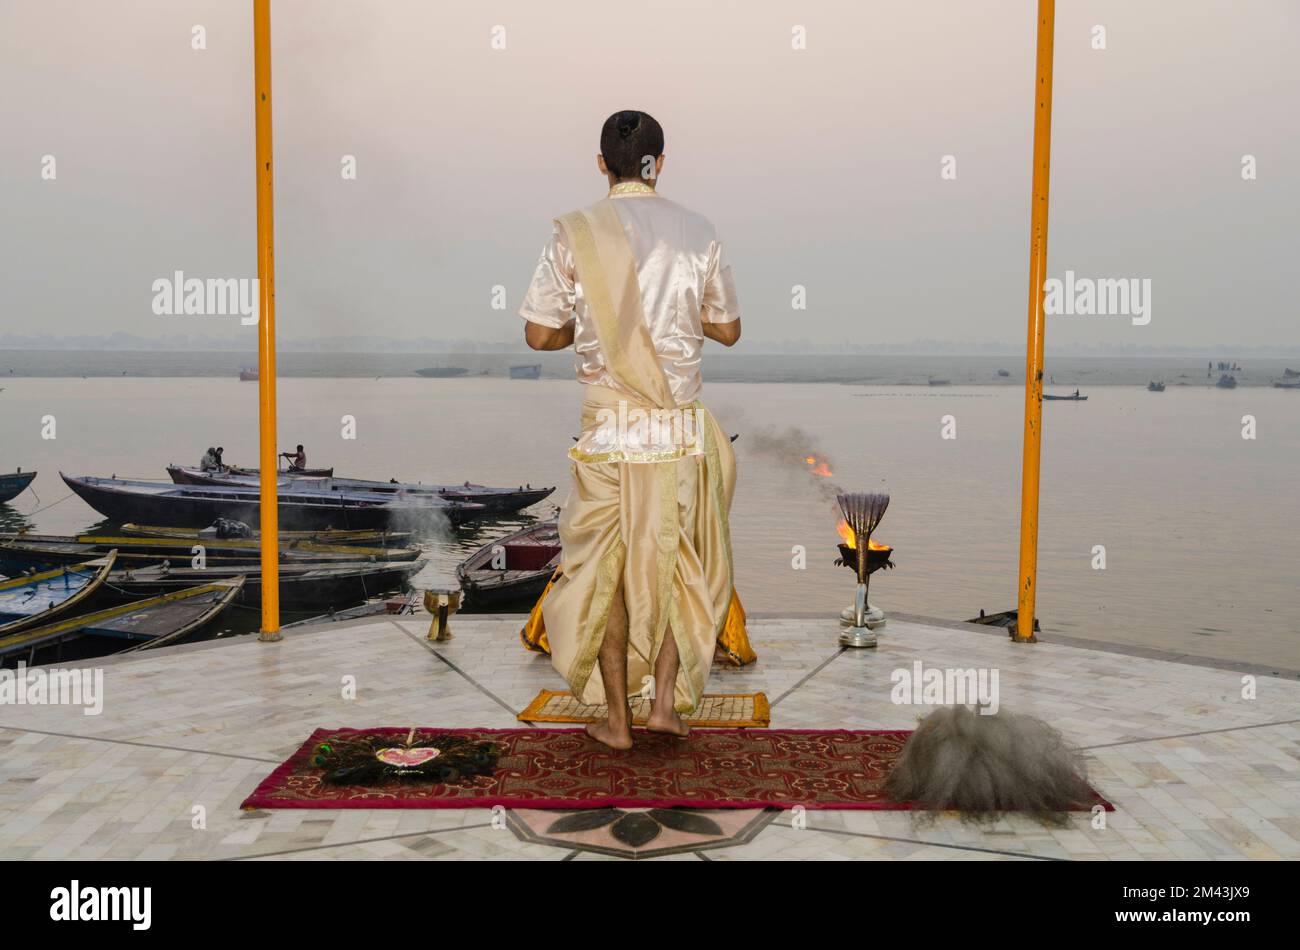 Priest performing a ceremony at sunrise at the ghats Stock Photo